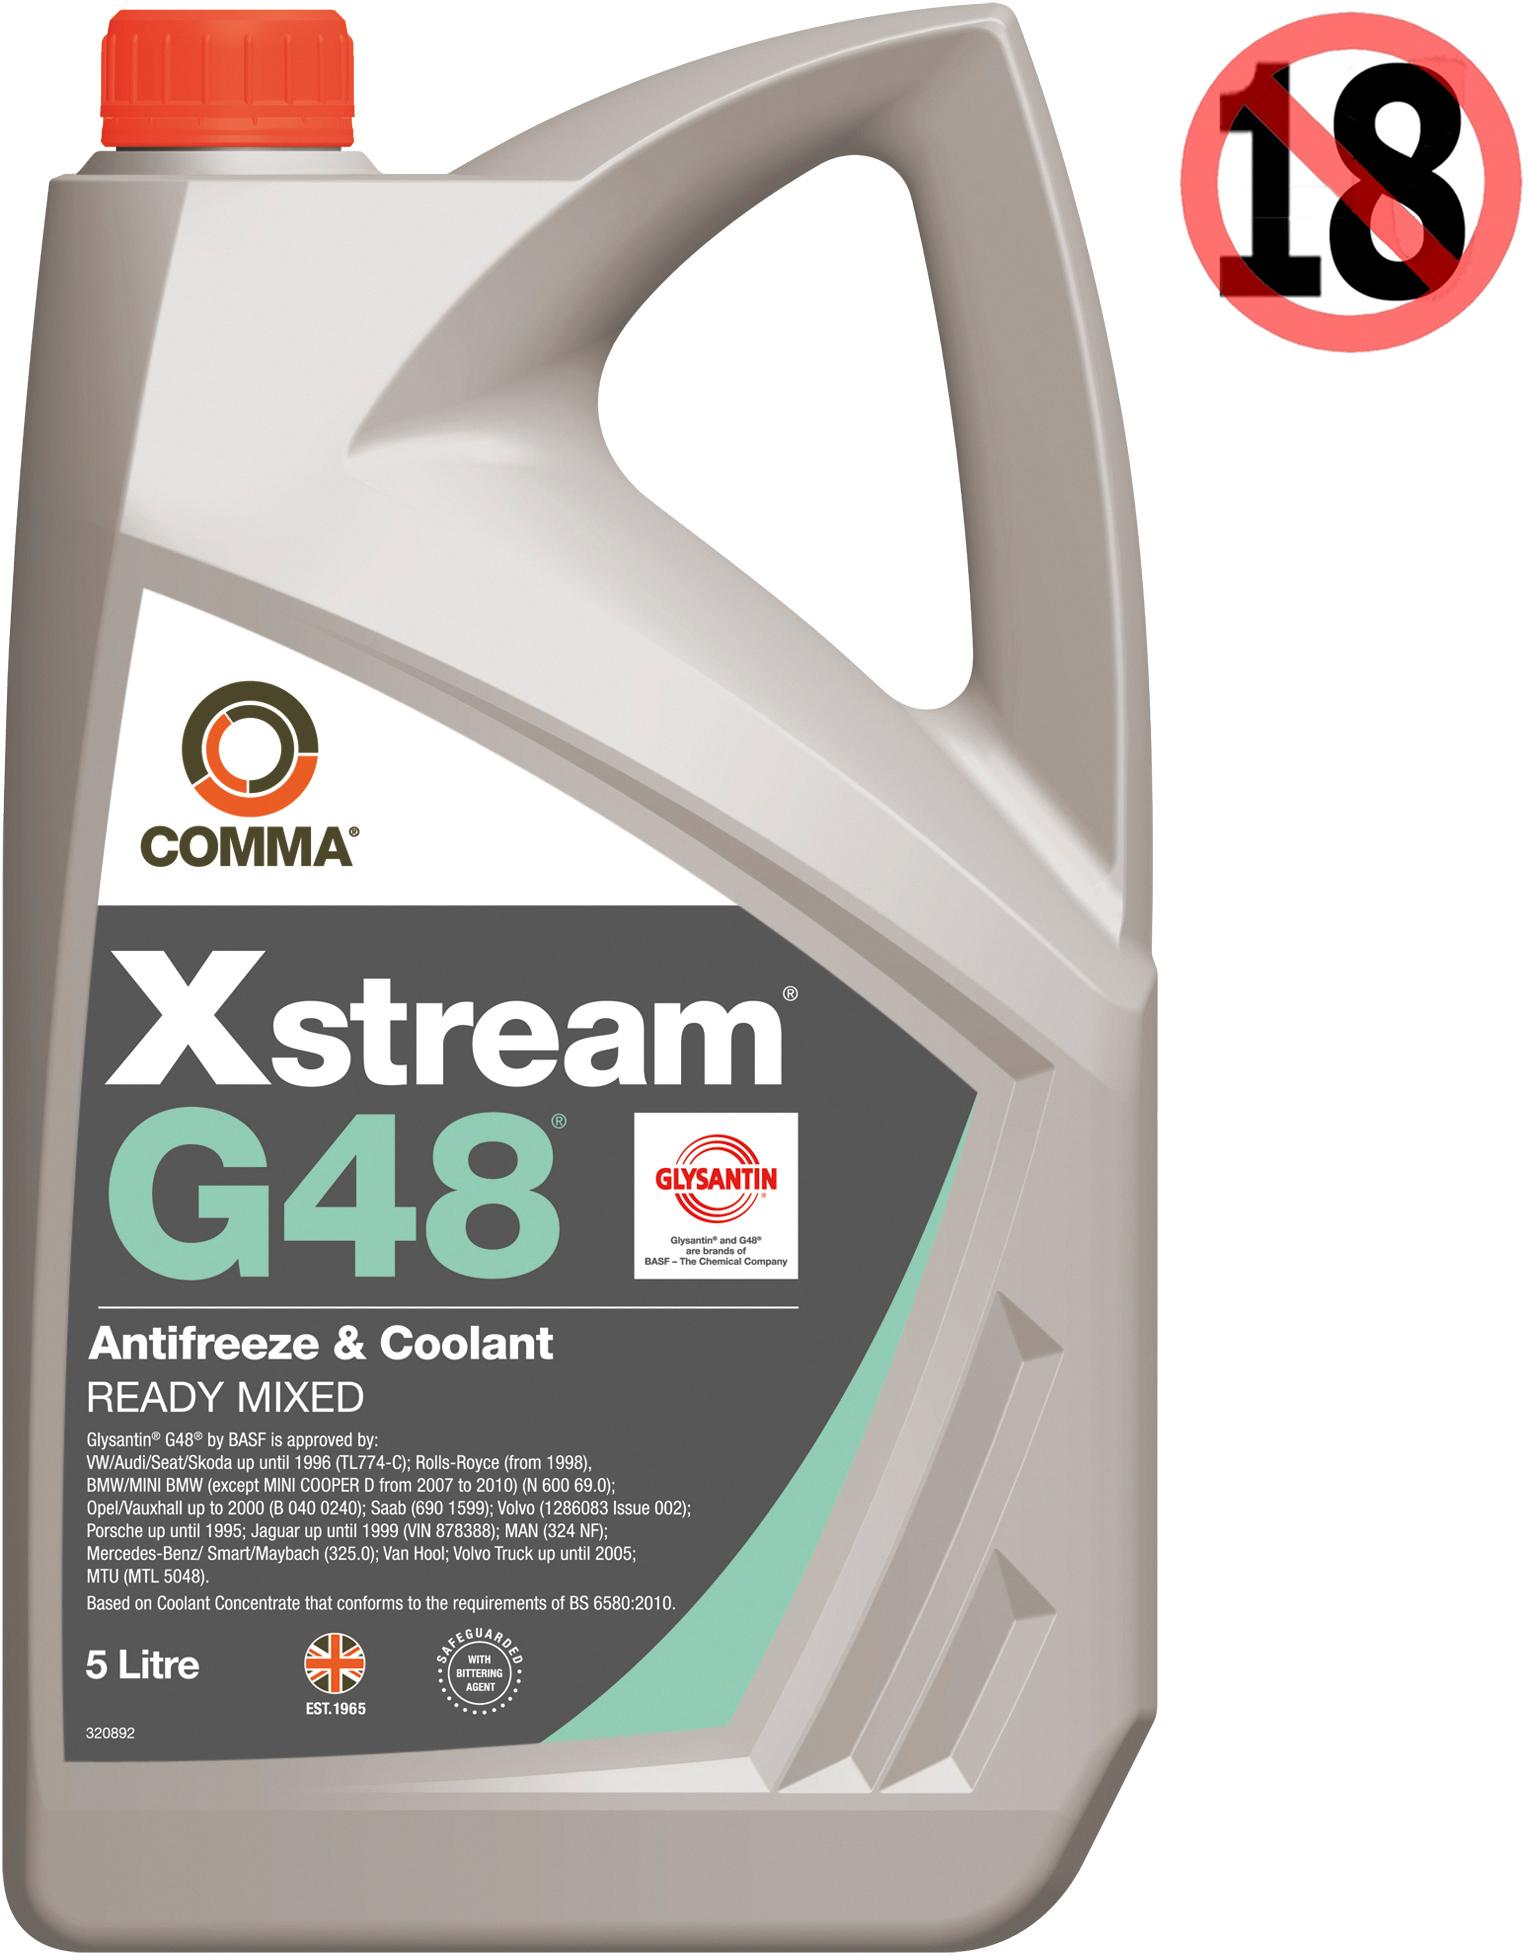 Comma G48 Antifreeze and Coolant Ready Mixed 5L